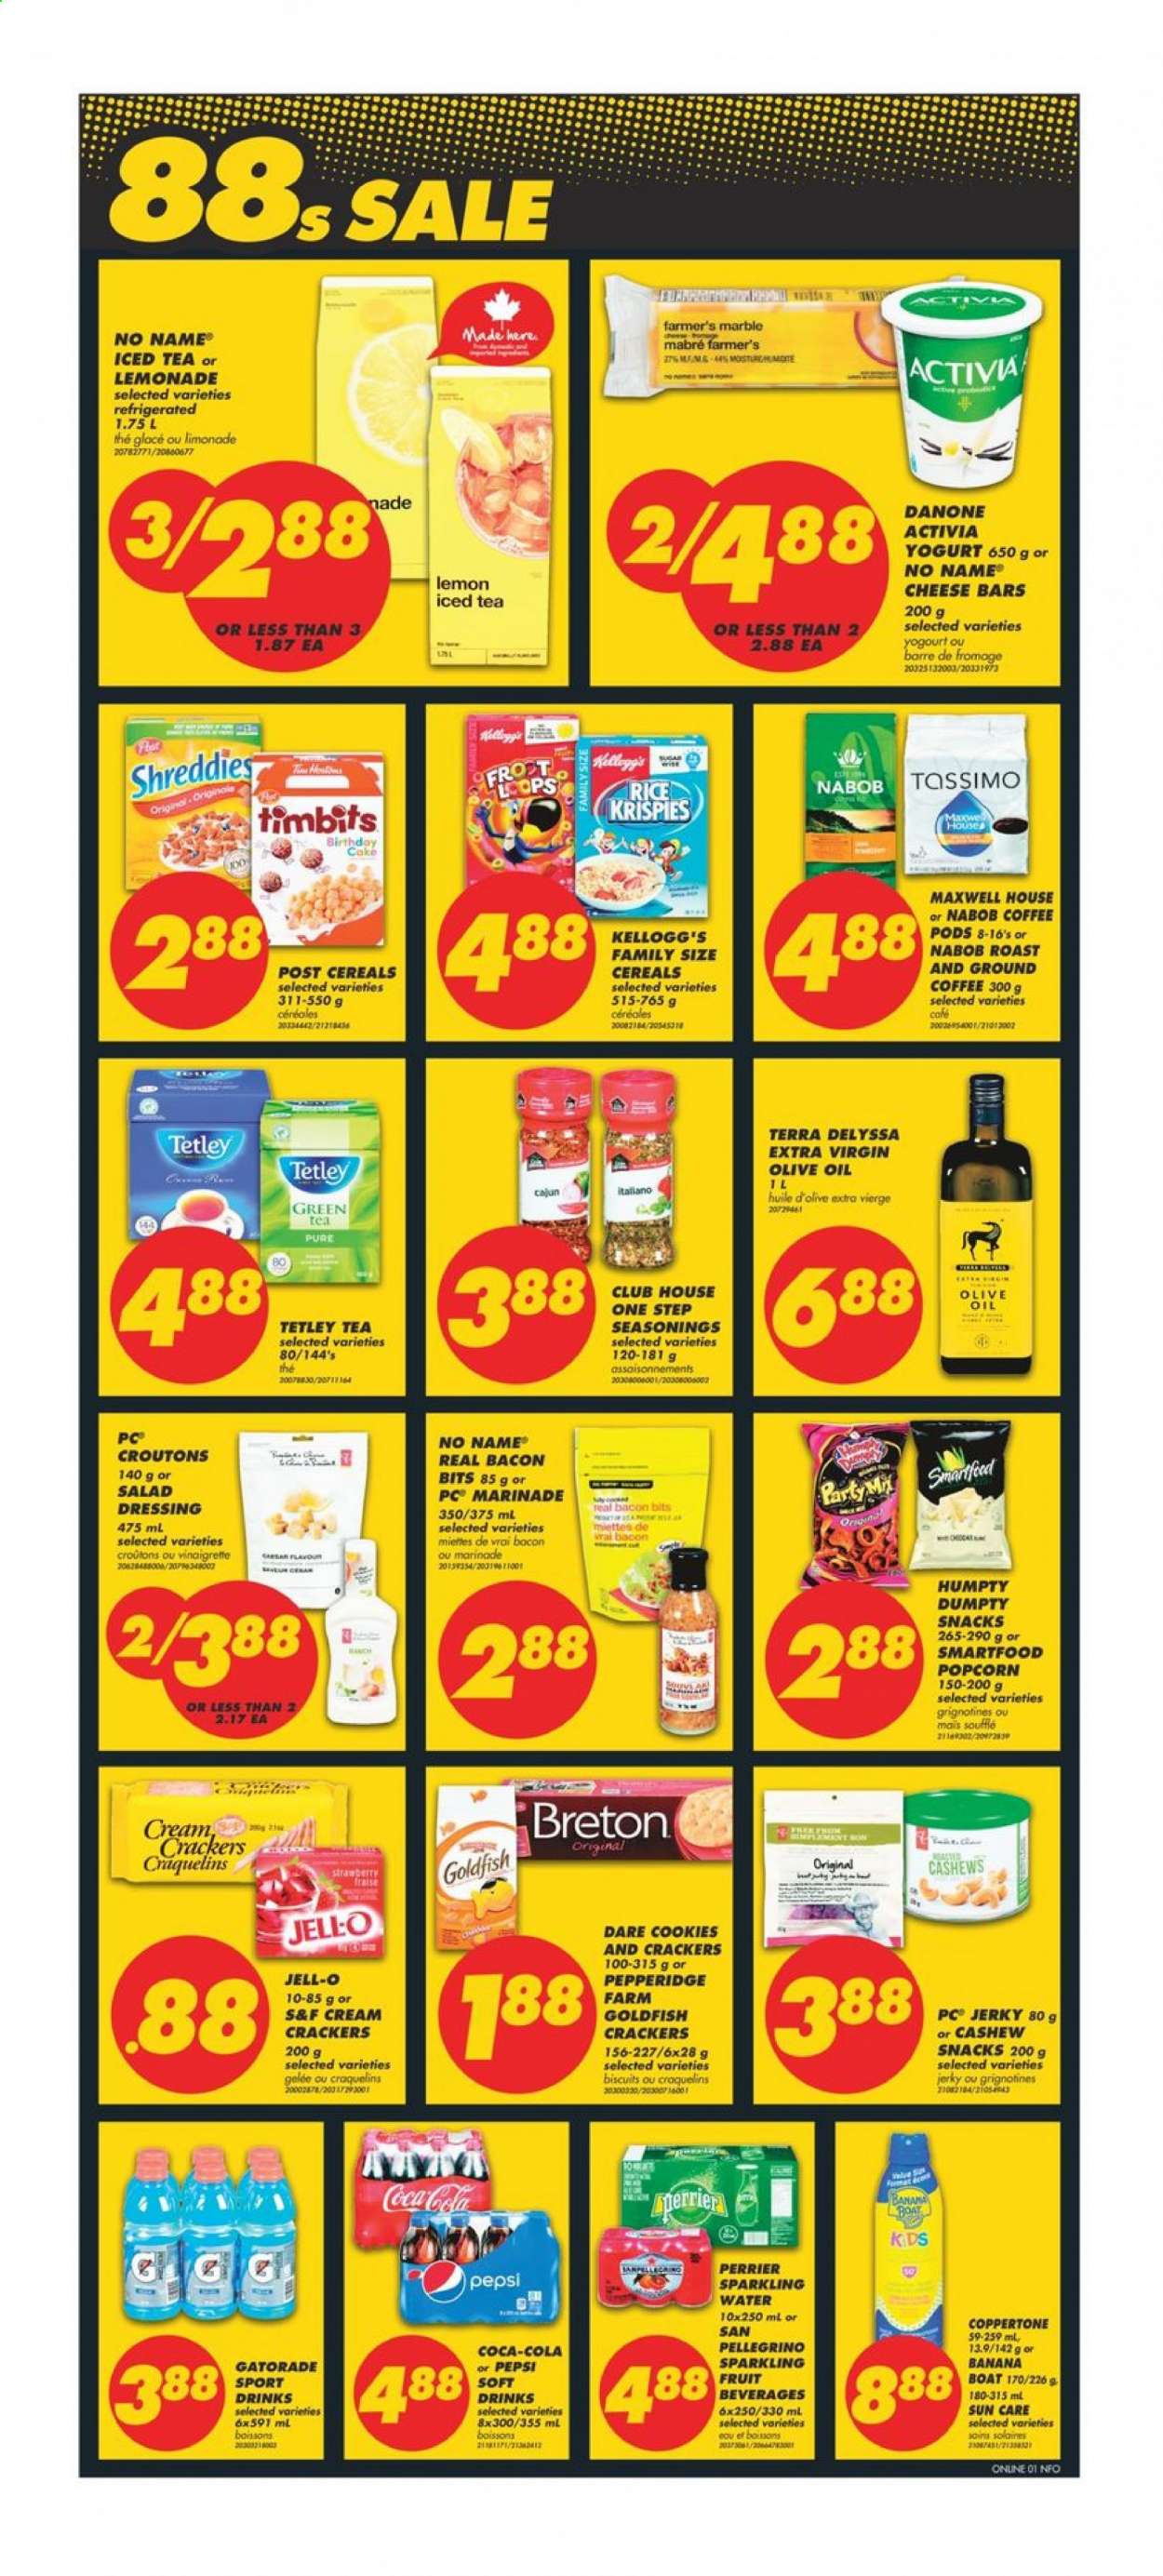 thumbnail - No Frills Flyer - June 30, 2021 - July 07, 2021 - Sales products - cake, No Name, jerky, yoghurt, Activia, cookies, snack, crackers, Kellogg's, biscuit, Smartfood, Goldfish, croutons, sugar, Jell-O, bacon bits, cereals, Rice Krispies, vinaigrette dressing, dressing, marinade, extra virgin olive oil, olive oil, oil, cashews, Coca-Cola, lemonade, Pepsi, ice tea, soft drink, Perrier, Gatorade, sparkling water, San Pellegrino, green tea, Maxwell House, coffee pods, Danone. Page 6.